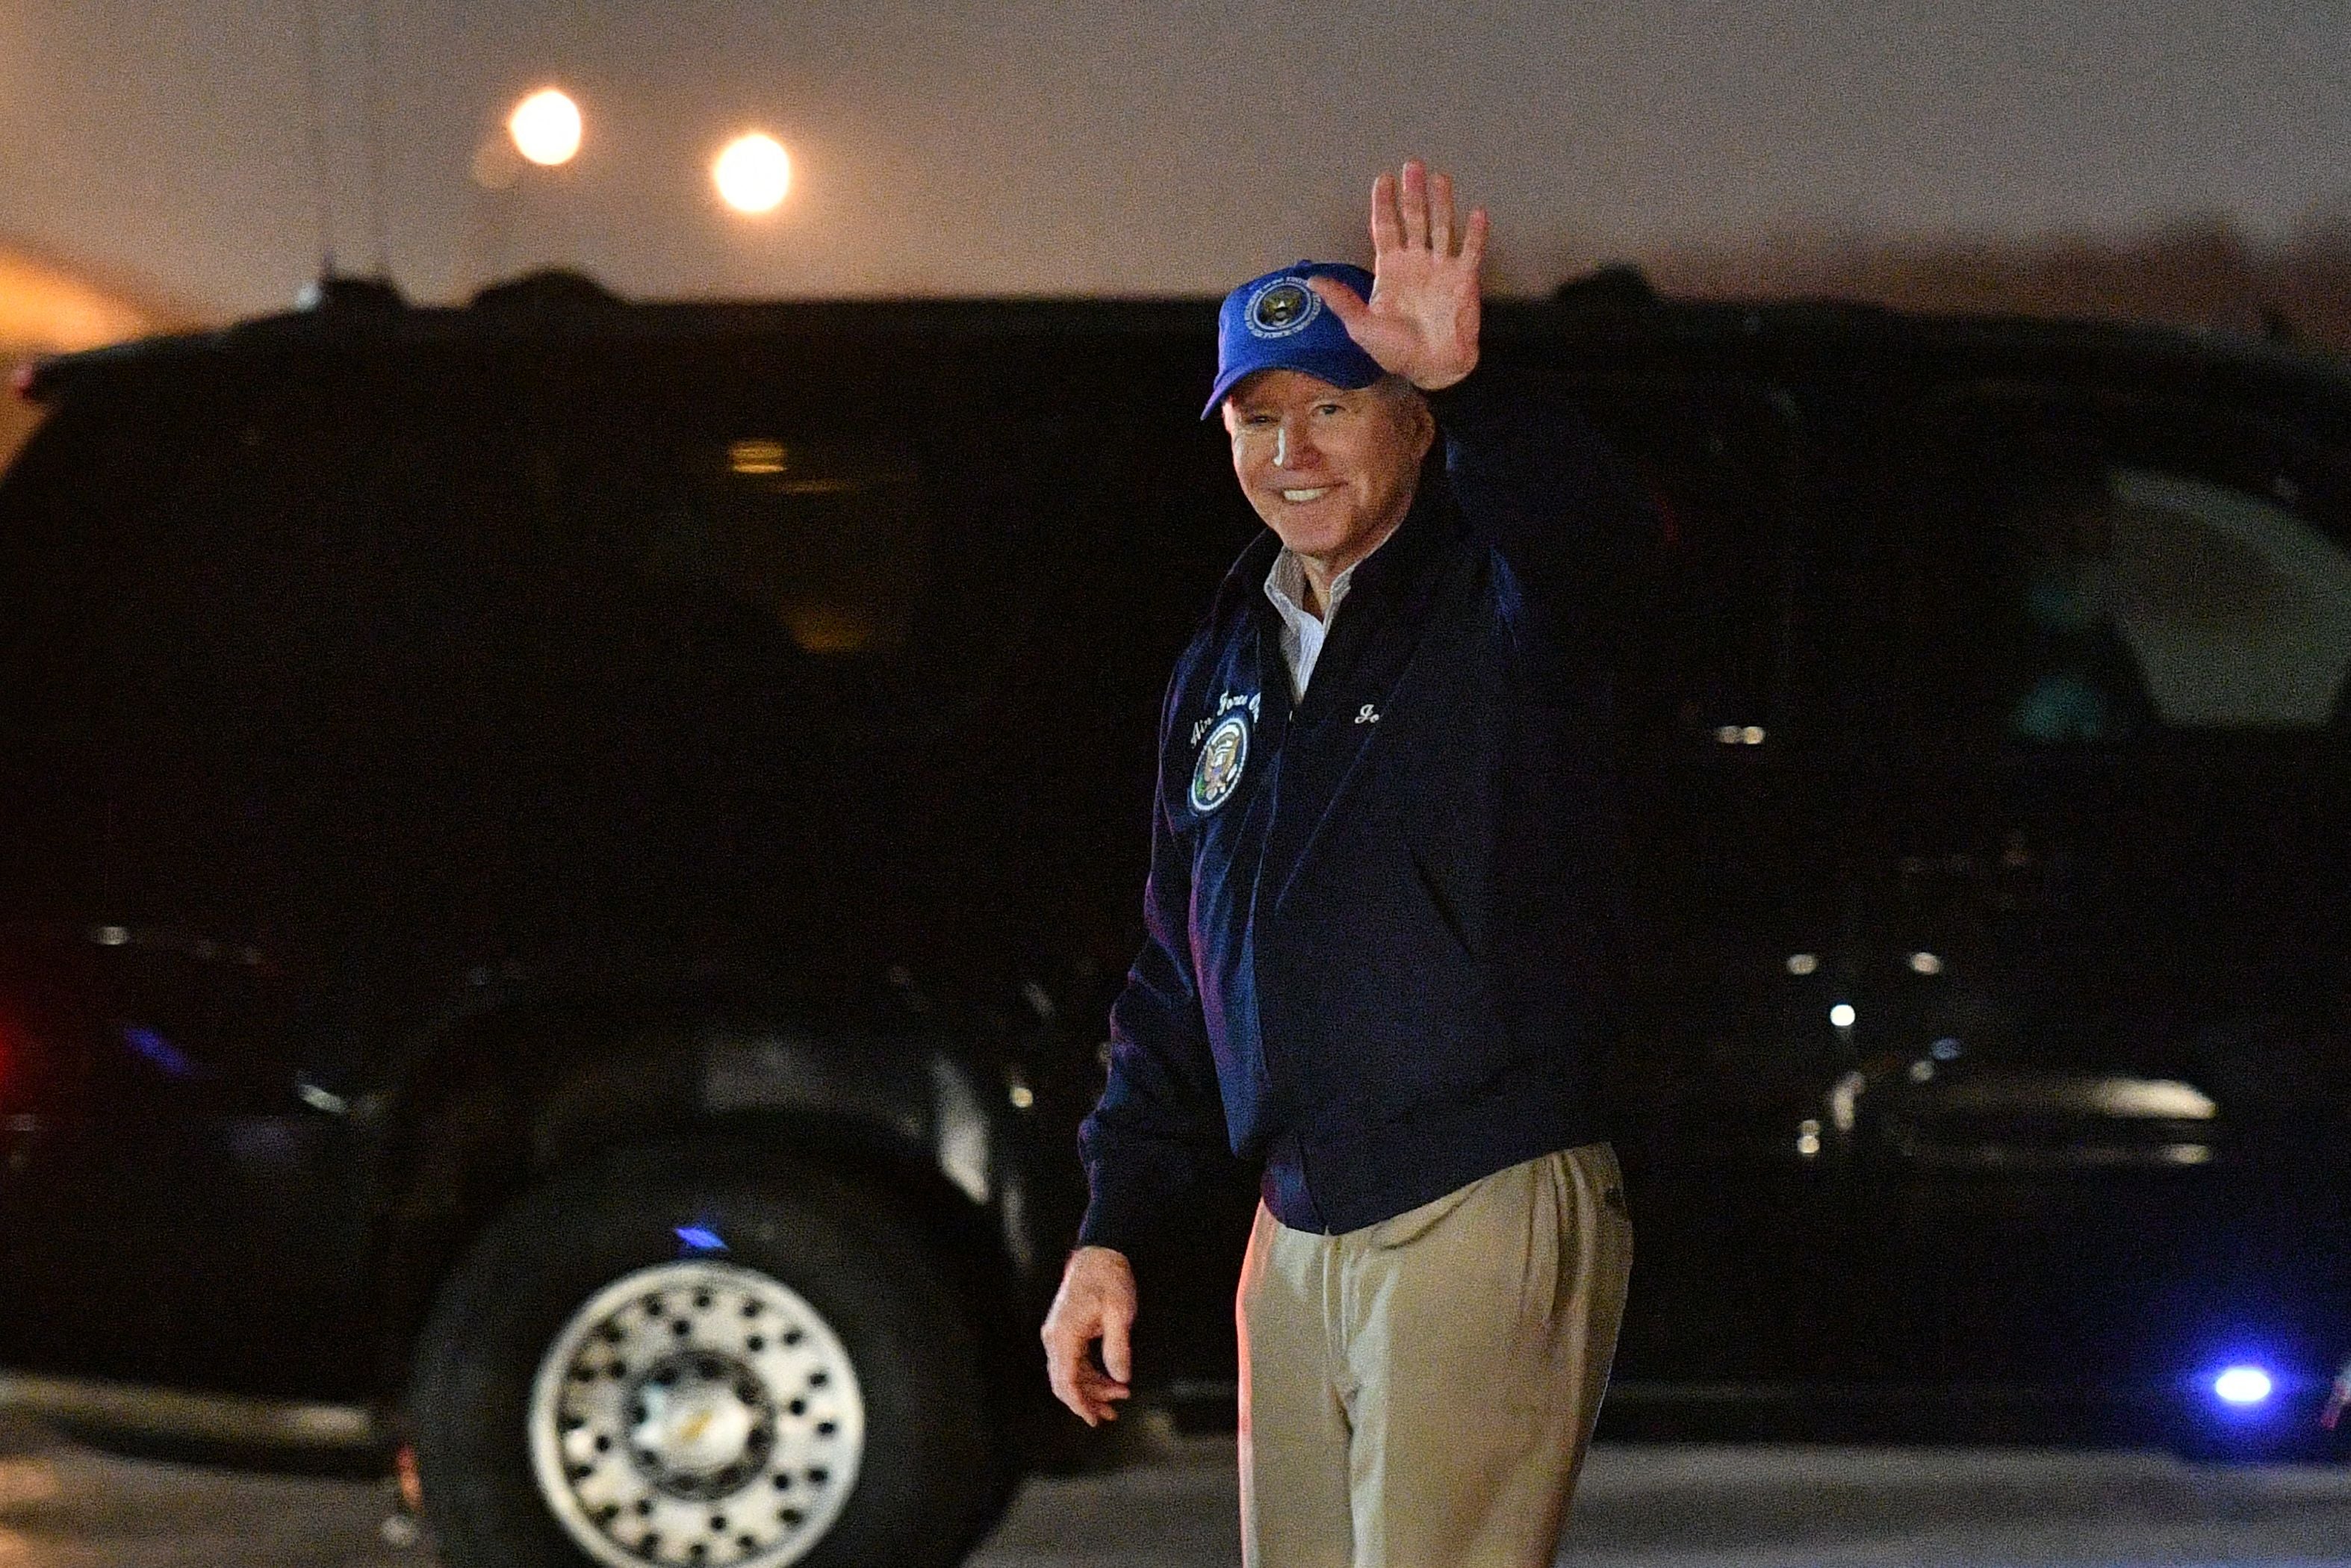 Joe Biden waves upon arrival at Andrews Air Force Base in Maryland on Friday